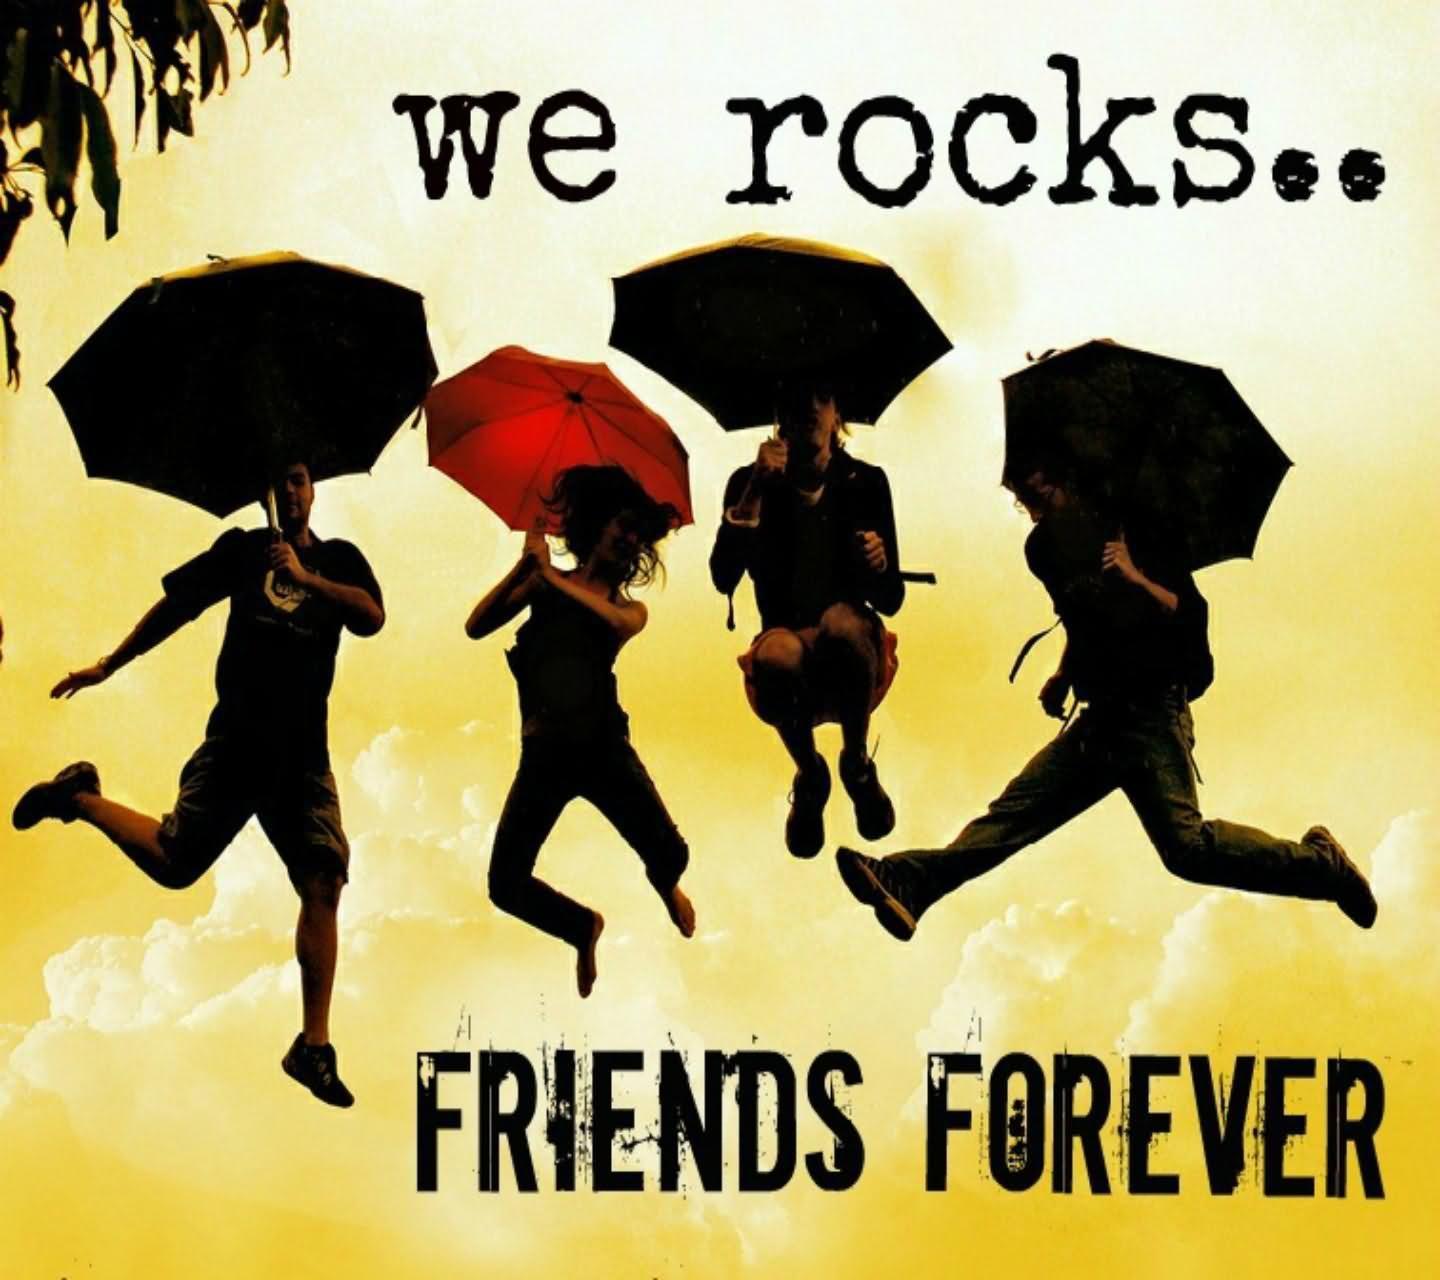 Group Friends Forever Image HD